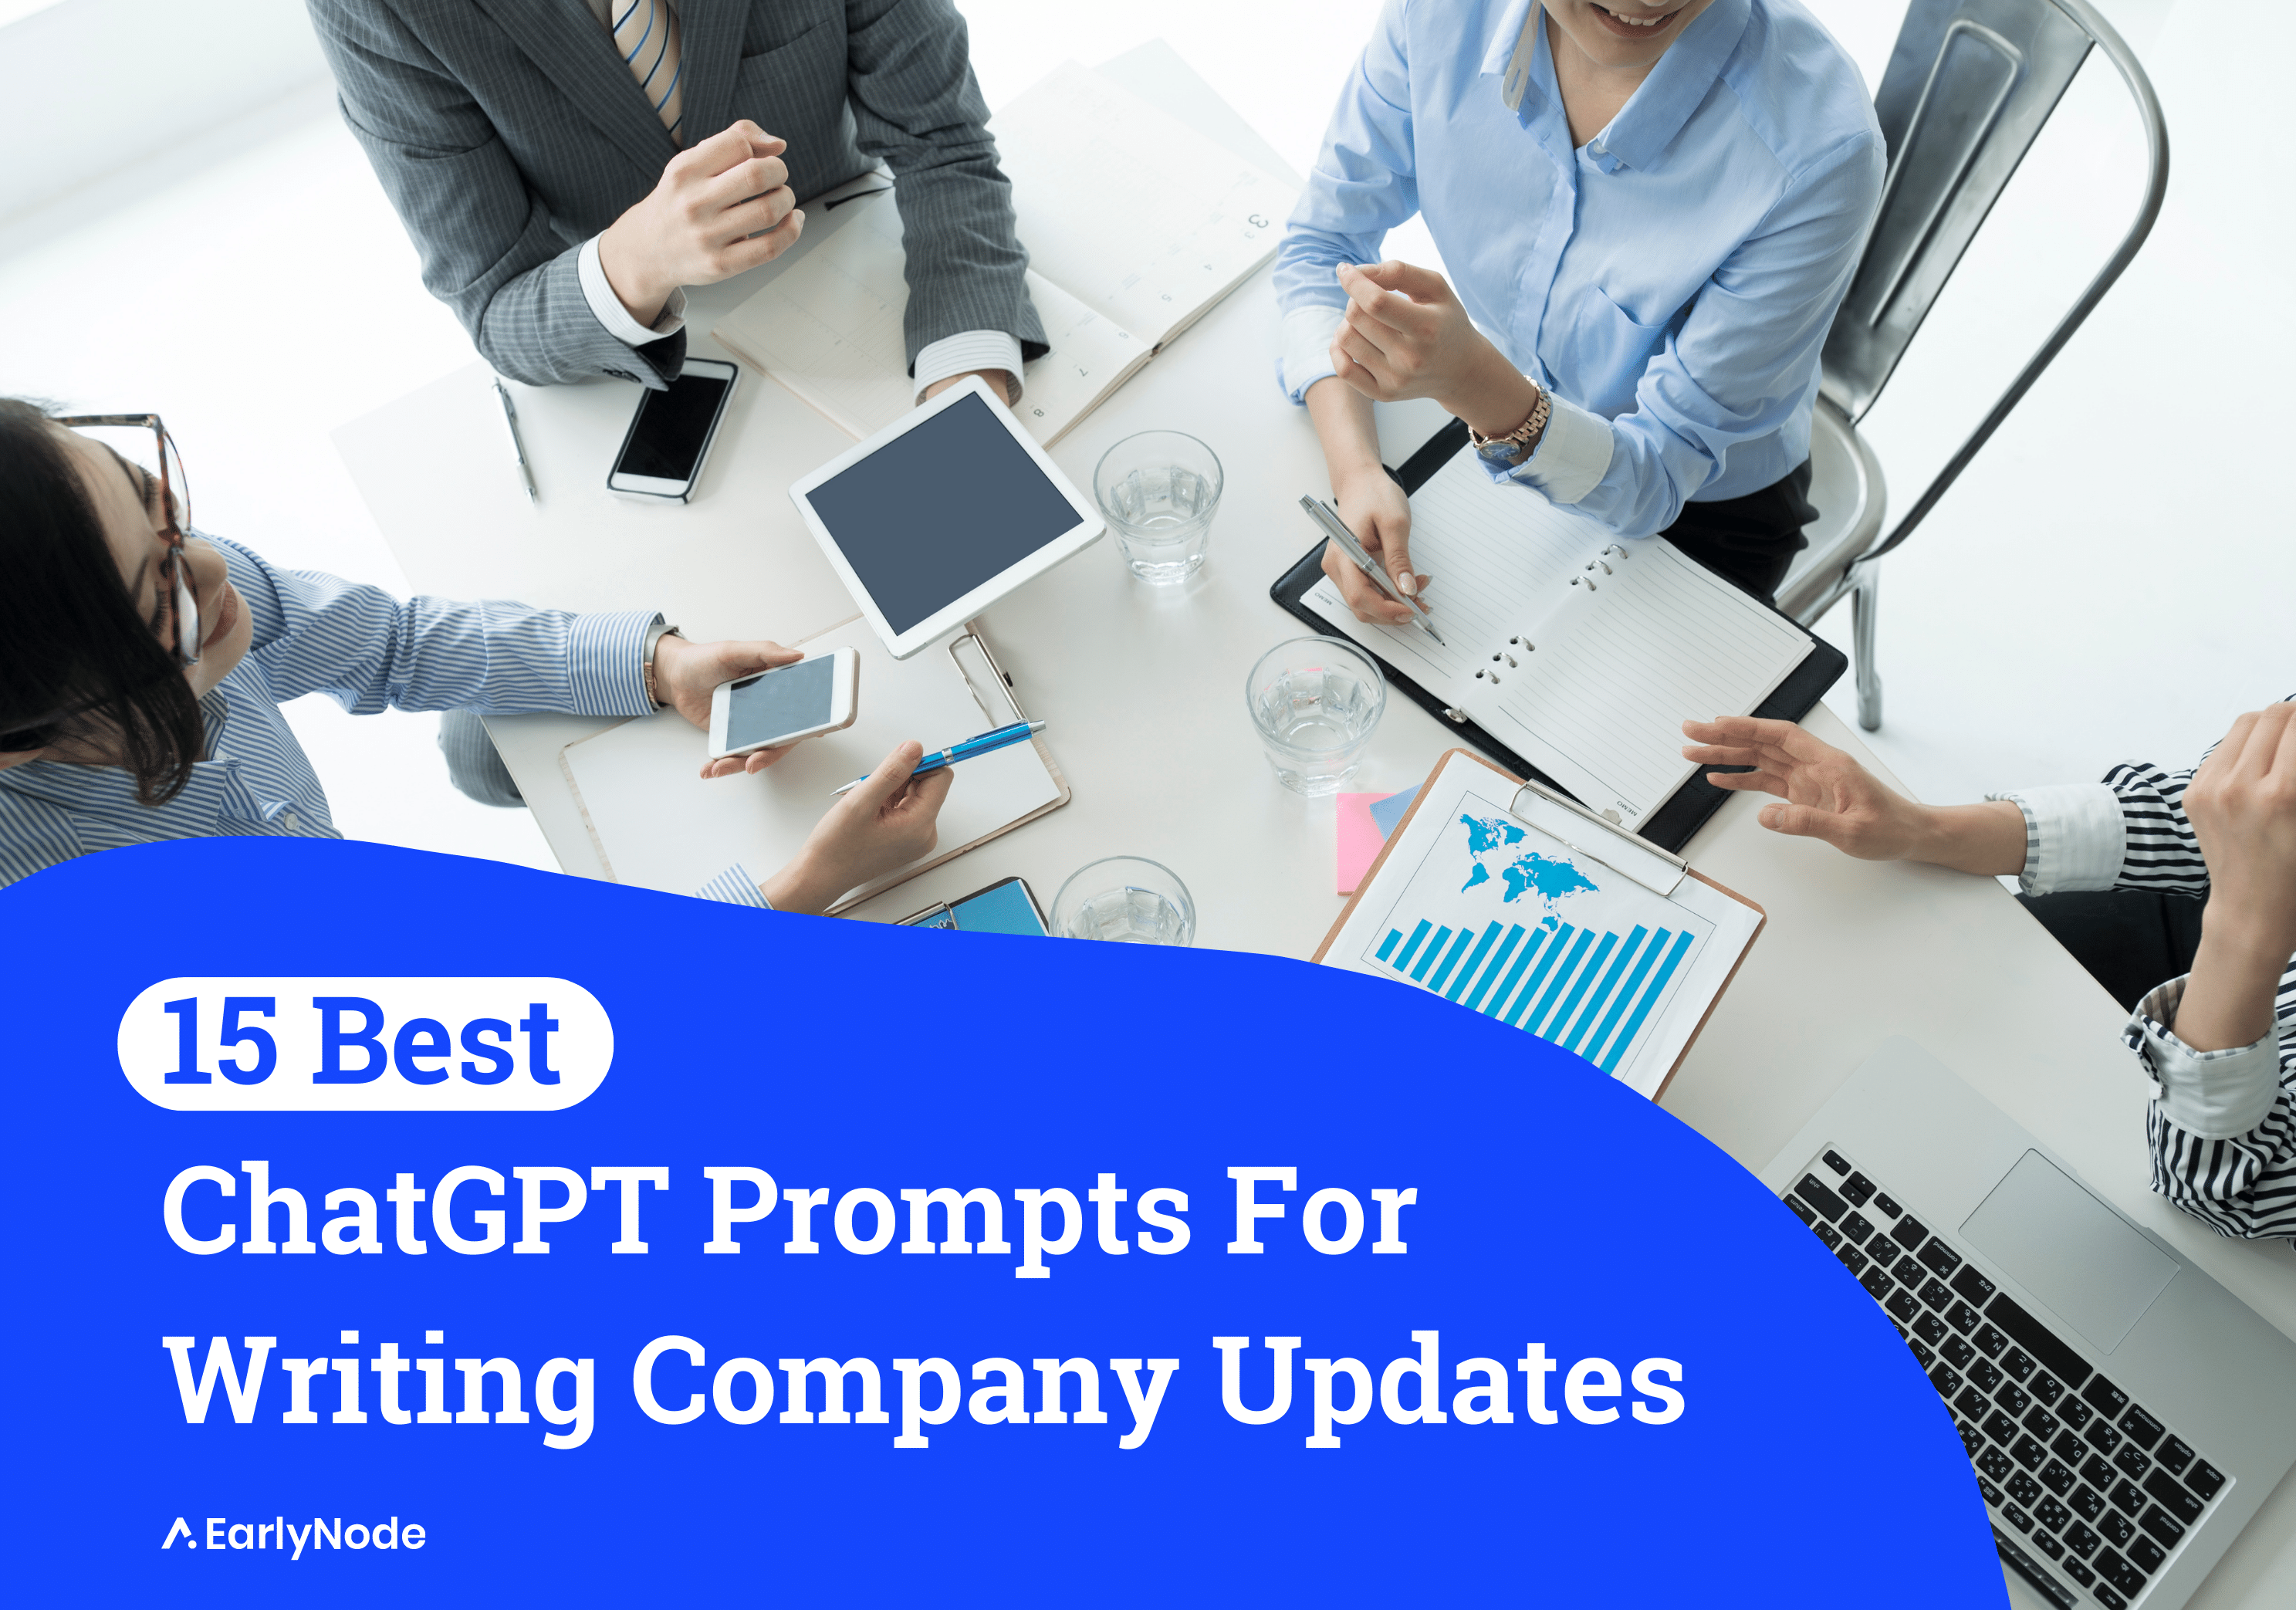 15 ChatGPT Prompts You Can Use To Write Company Updates